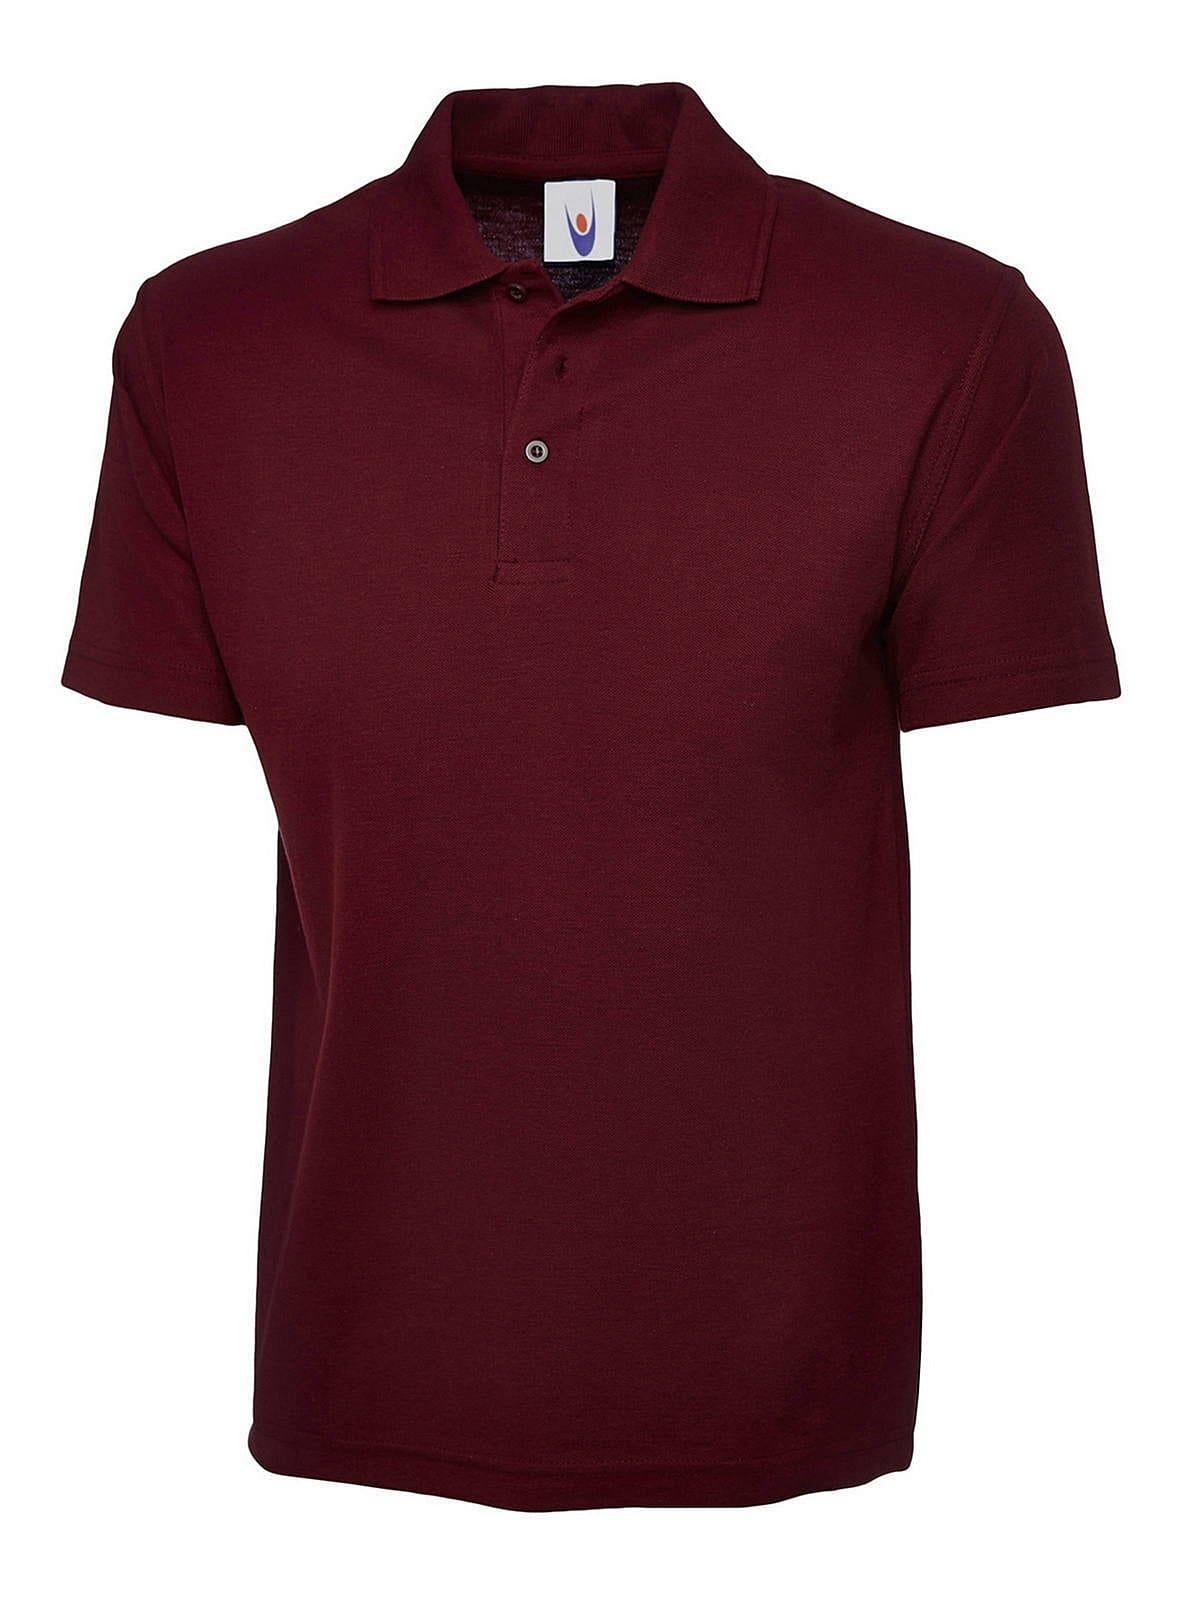 Uneek 220GSM Classic Polo Shirt in Maroon (Product Code: UC101)